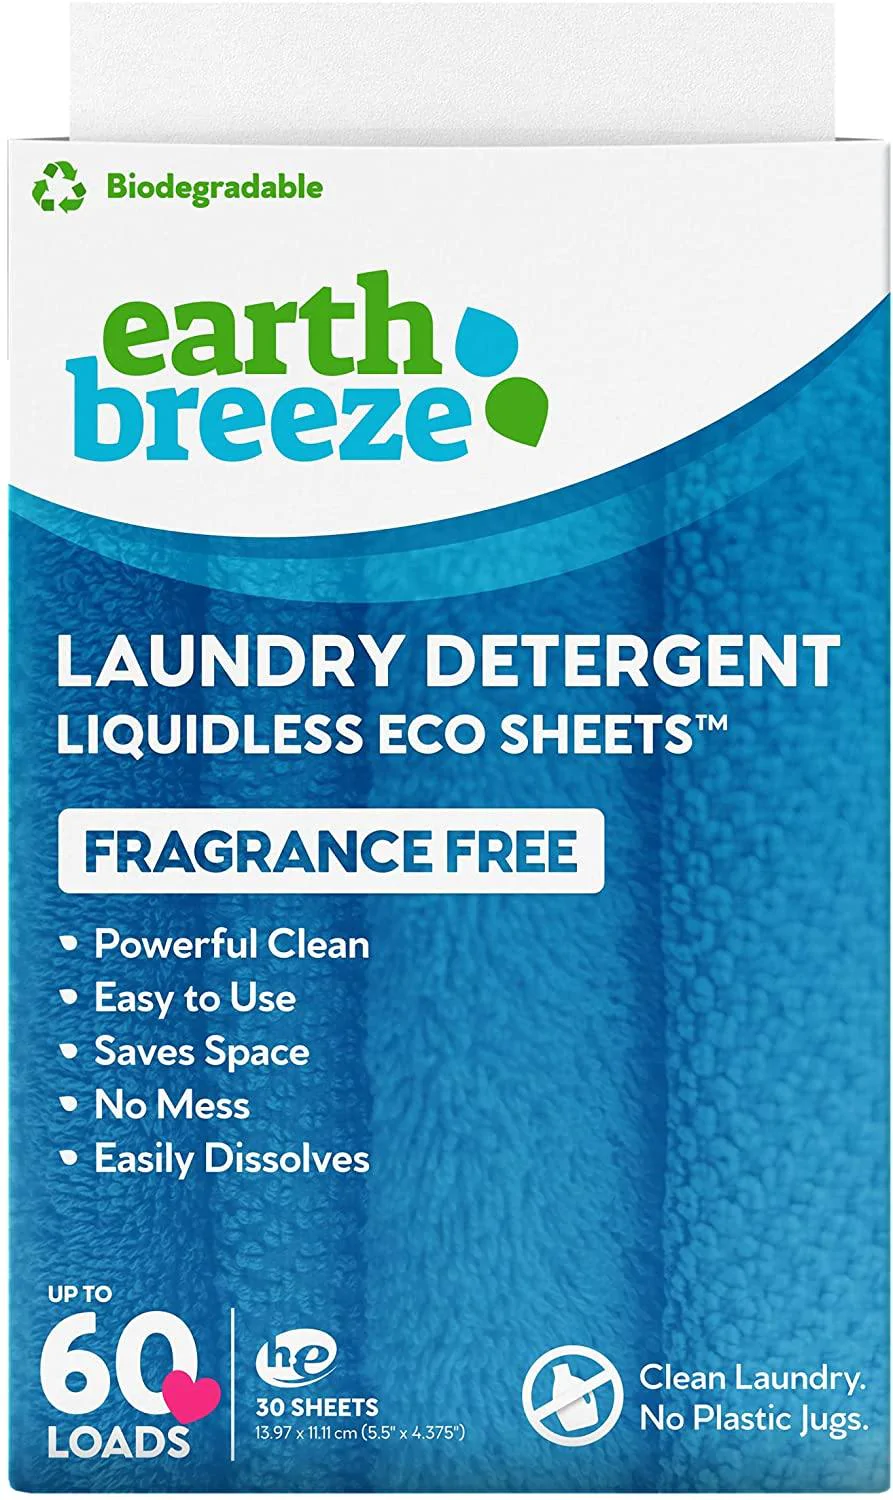 5 Reasons To Try Earth Breeze Laundry Detergent Eco Sheets - All